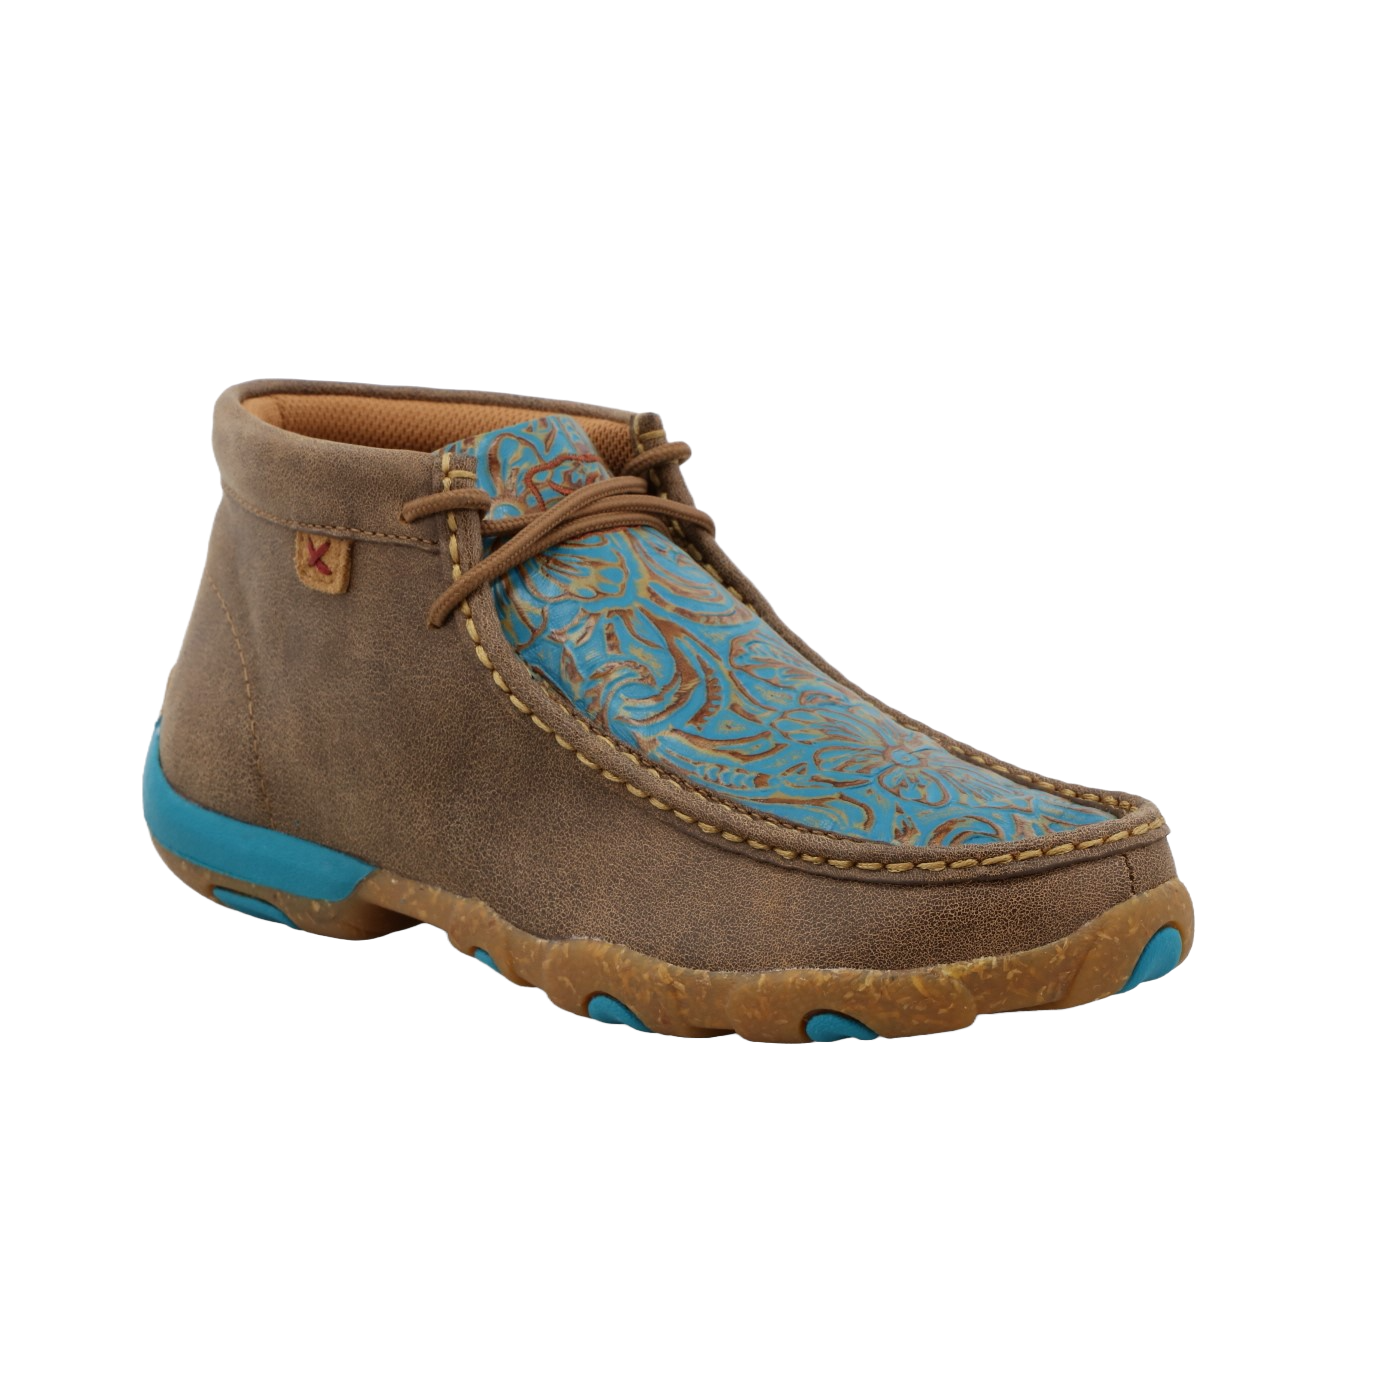 Twisted X Ladies Chukka Driving Moc Bomber & Turquoise Shoes WDM0148